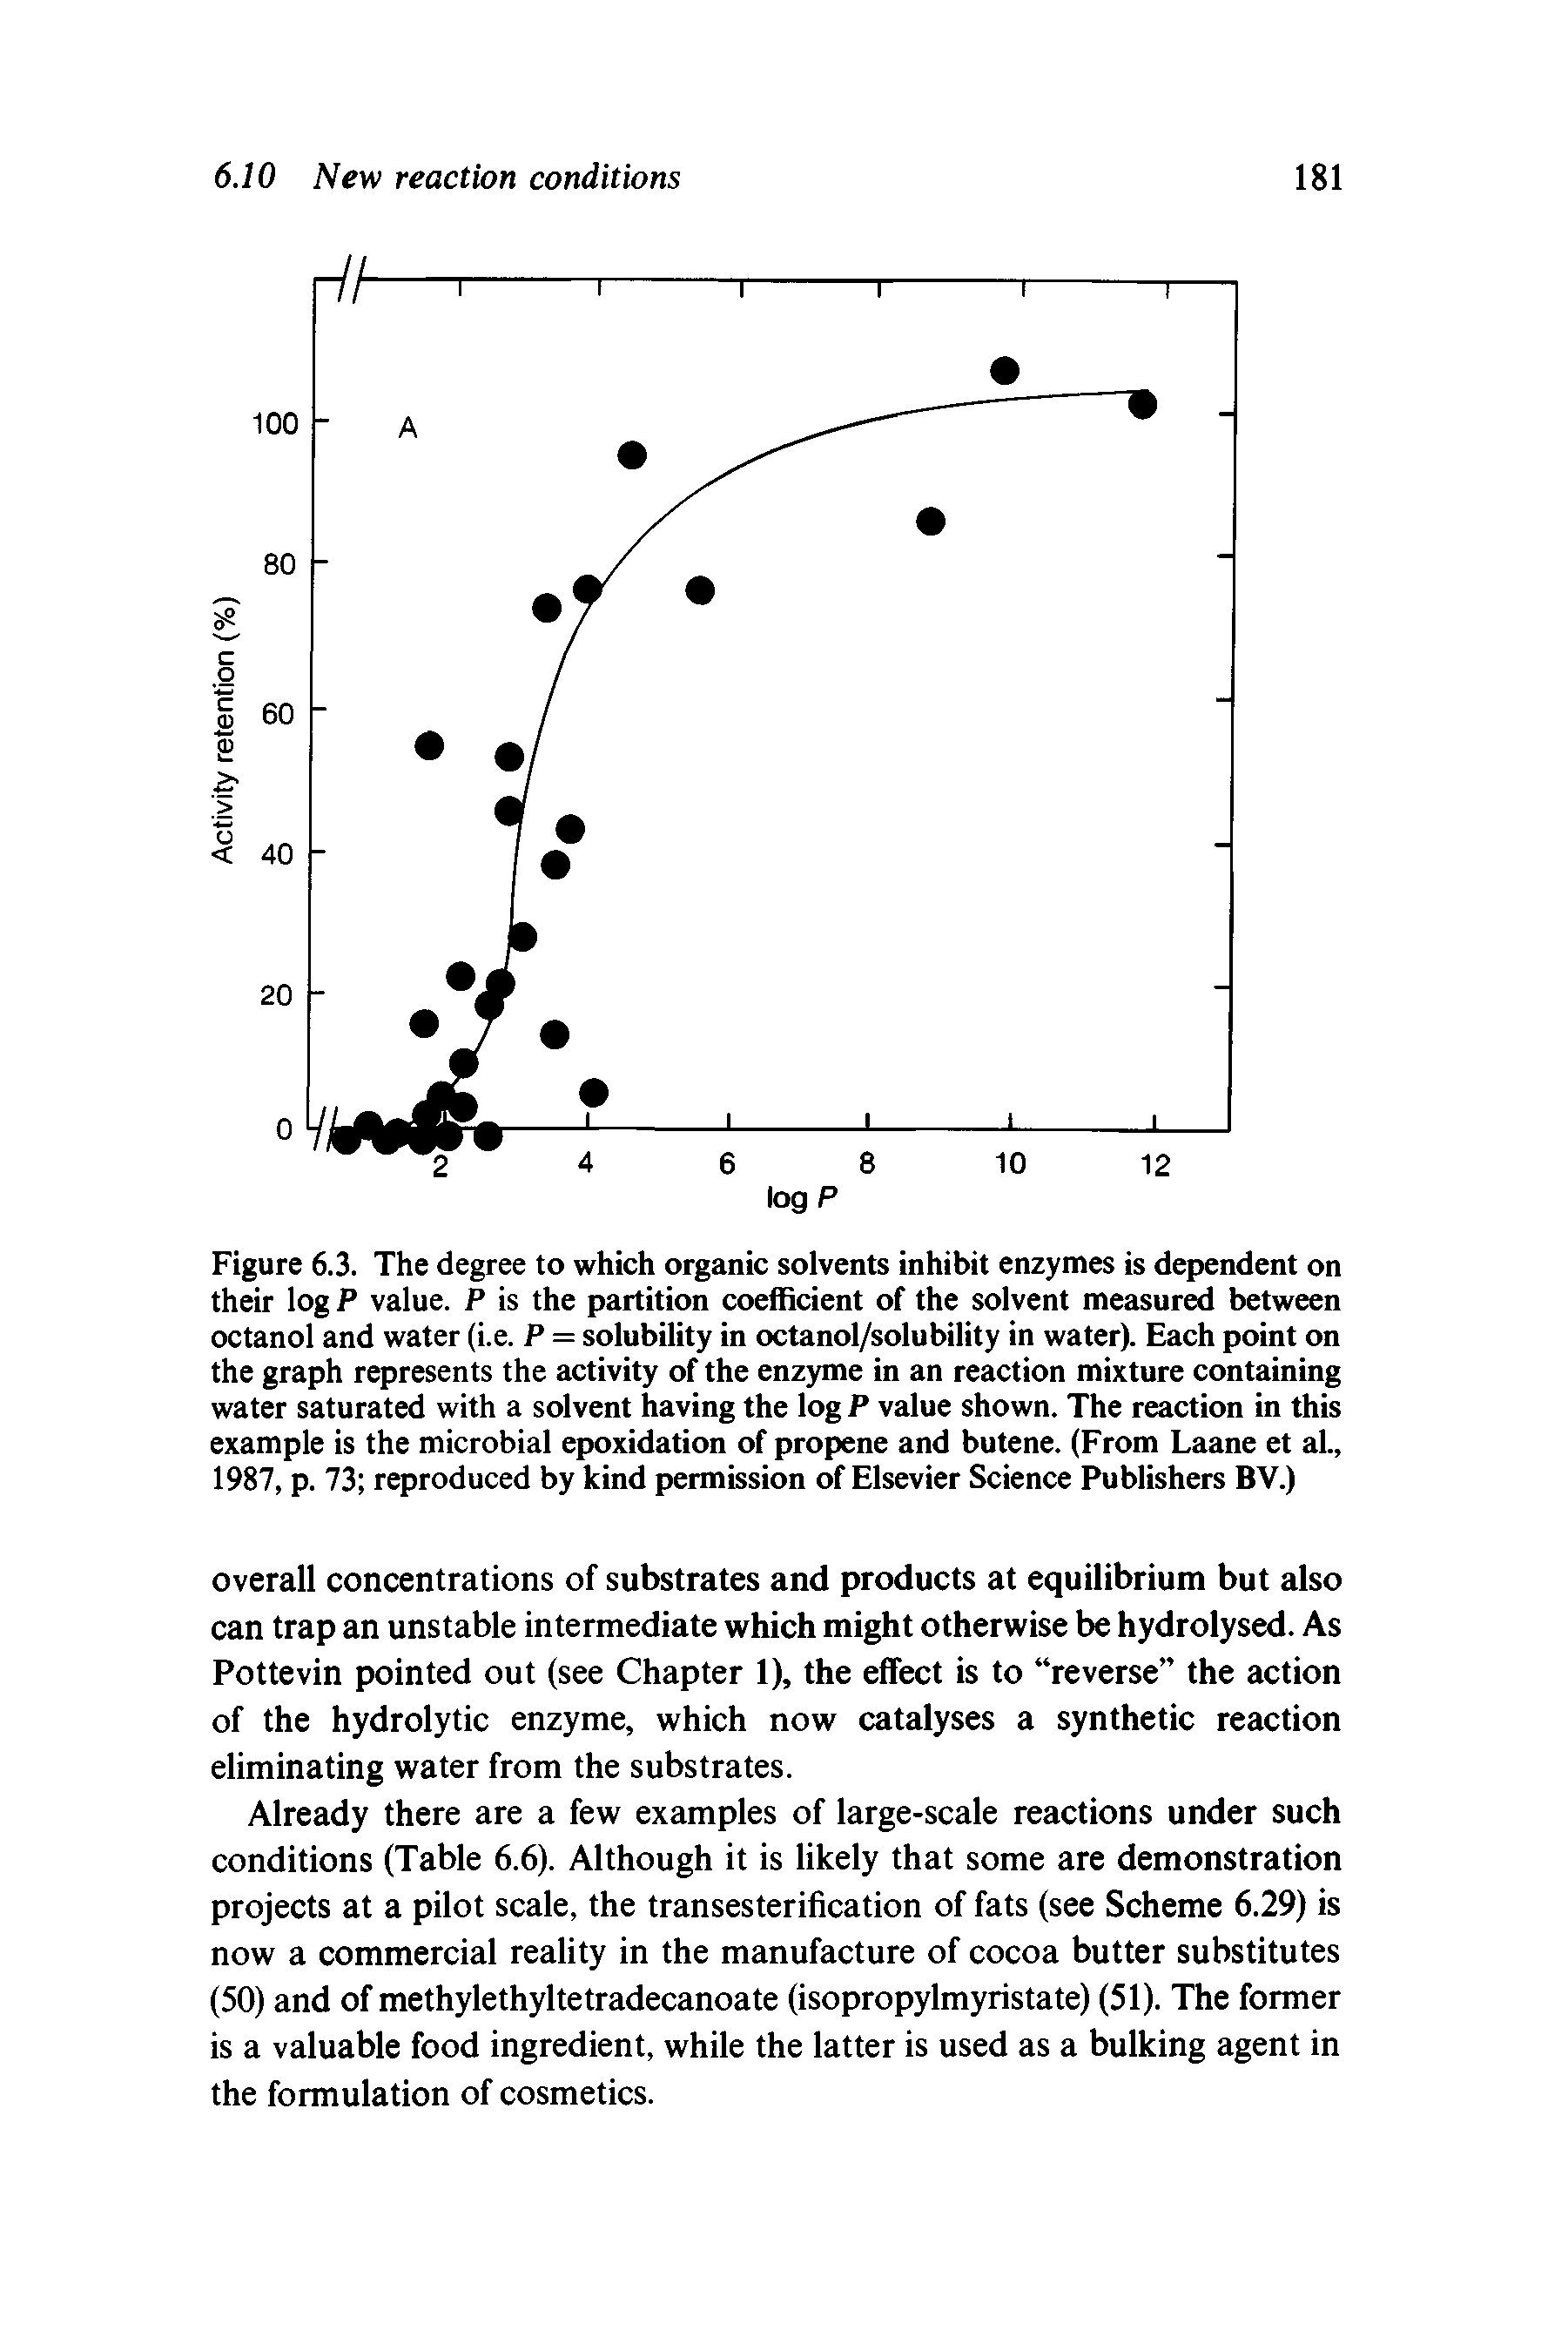 Figure 6.3. The degree to which organic solvents inhibit enzymes is dependent on their log P value. P is the partition coefficient of the solvent measured between octanol and water (i.e. P = solubility in octanol/solubility in water). Each point on the graph represents the activity of the enzyme in an reaction mixture containing water saturated with a solvent having the log P value shown. The reaction in this example is the microbial epoxidation of propene and butene. (From Laane et al., 1987, p. 73 reproduced by kind permission of Elsevier Science Publishers BV.)...